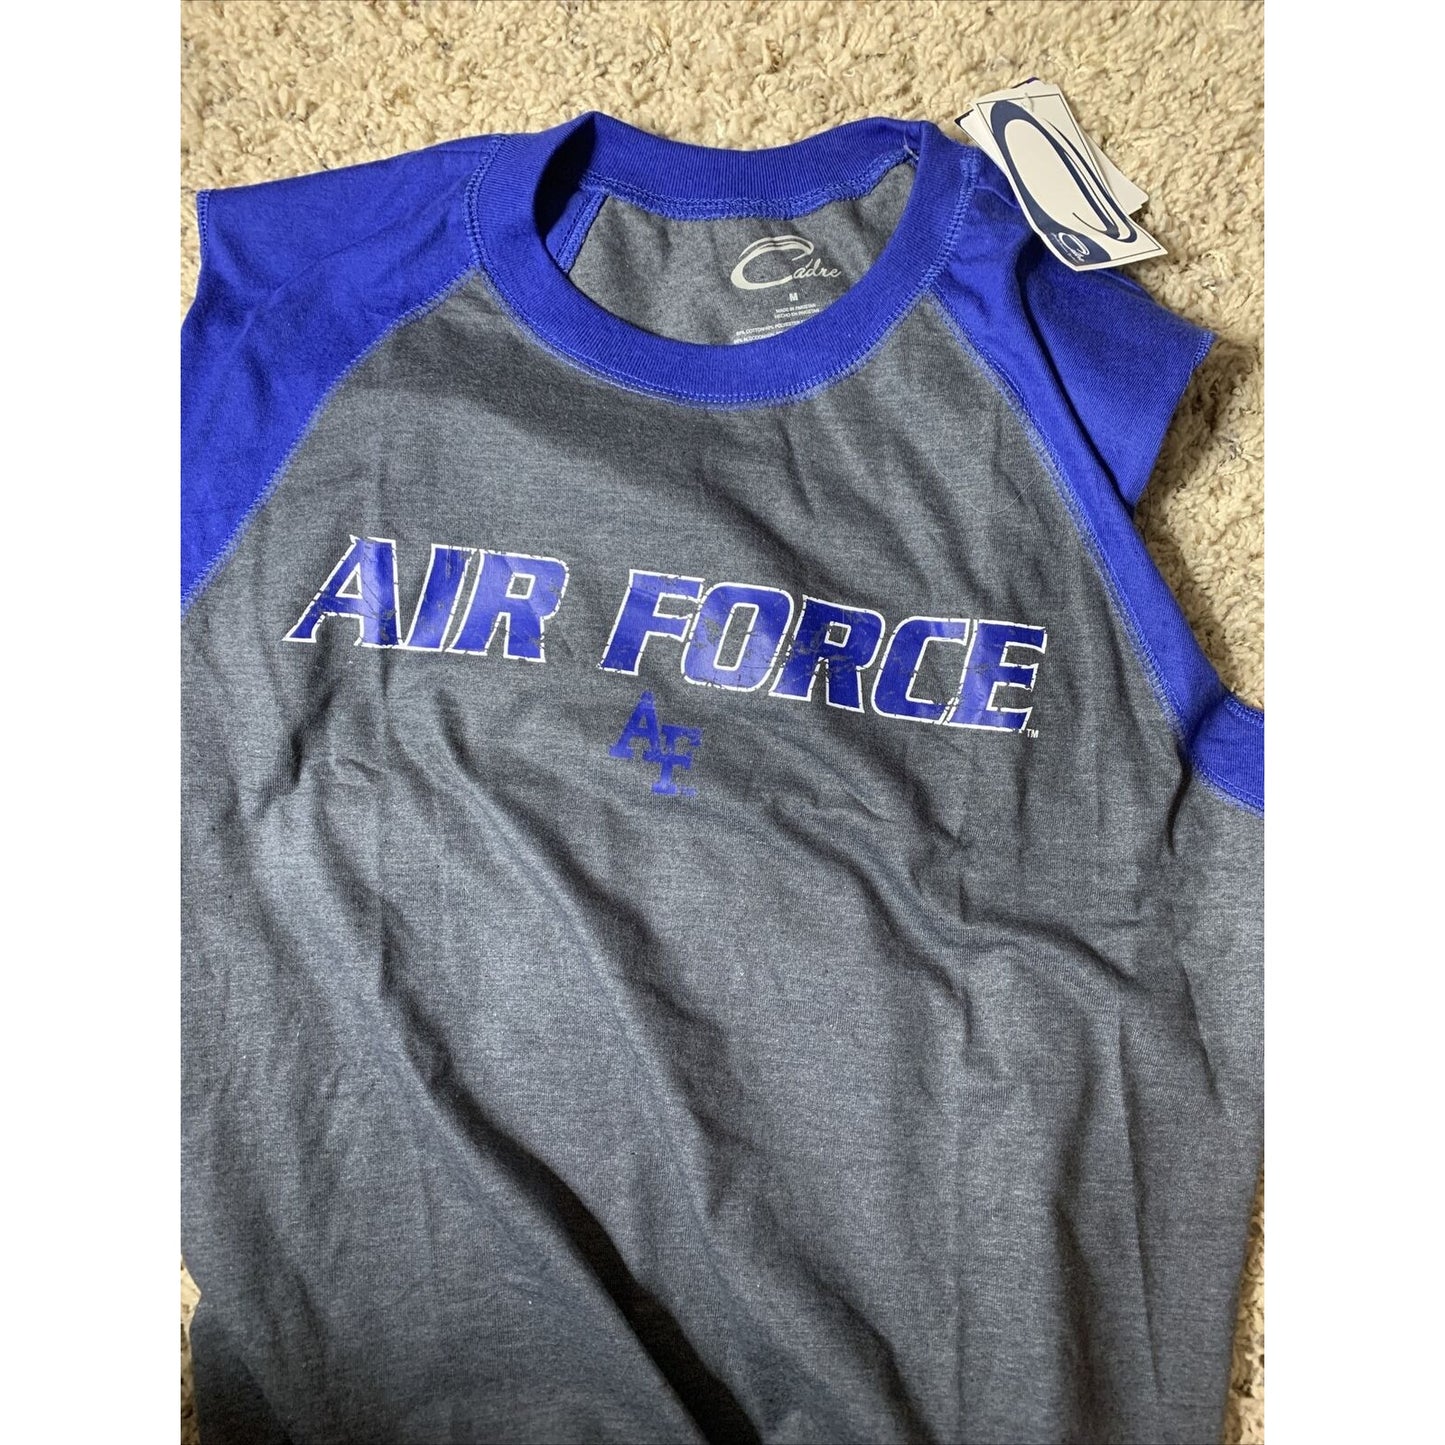 USAFA Air Force Falcons Cadre Licensed Muscle Shirt Tank Medium New With Tags!